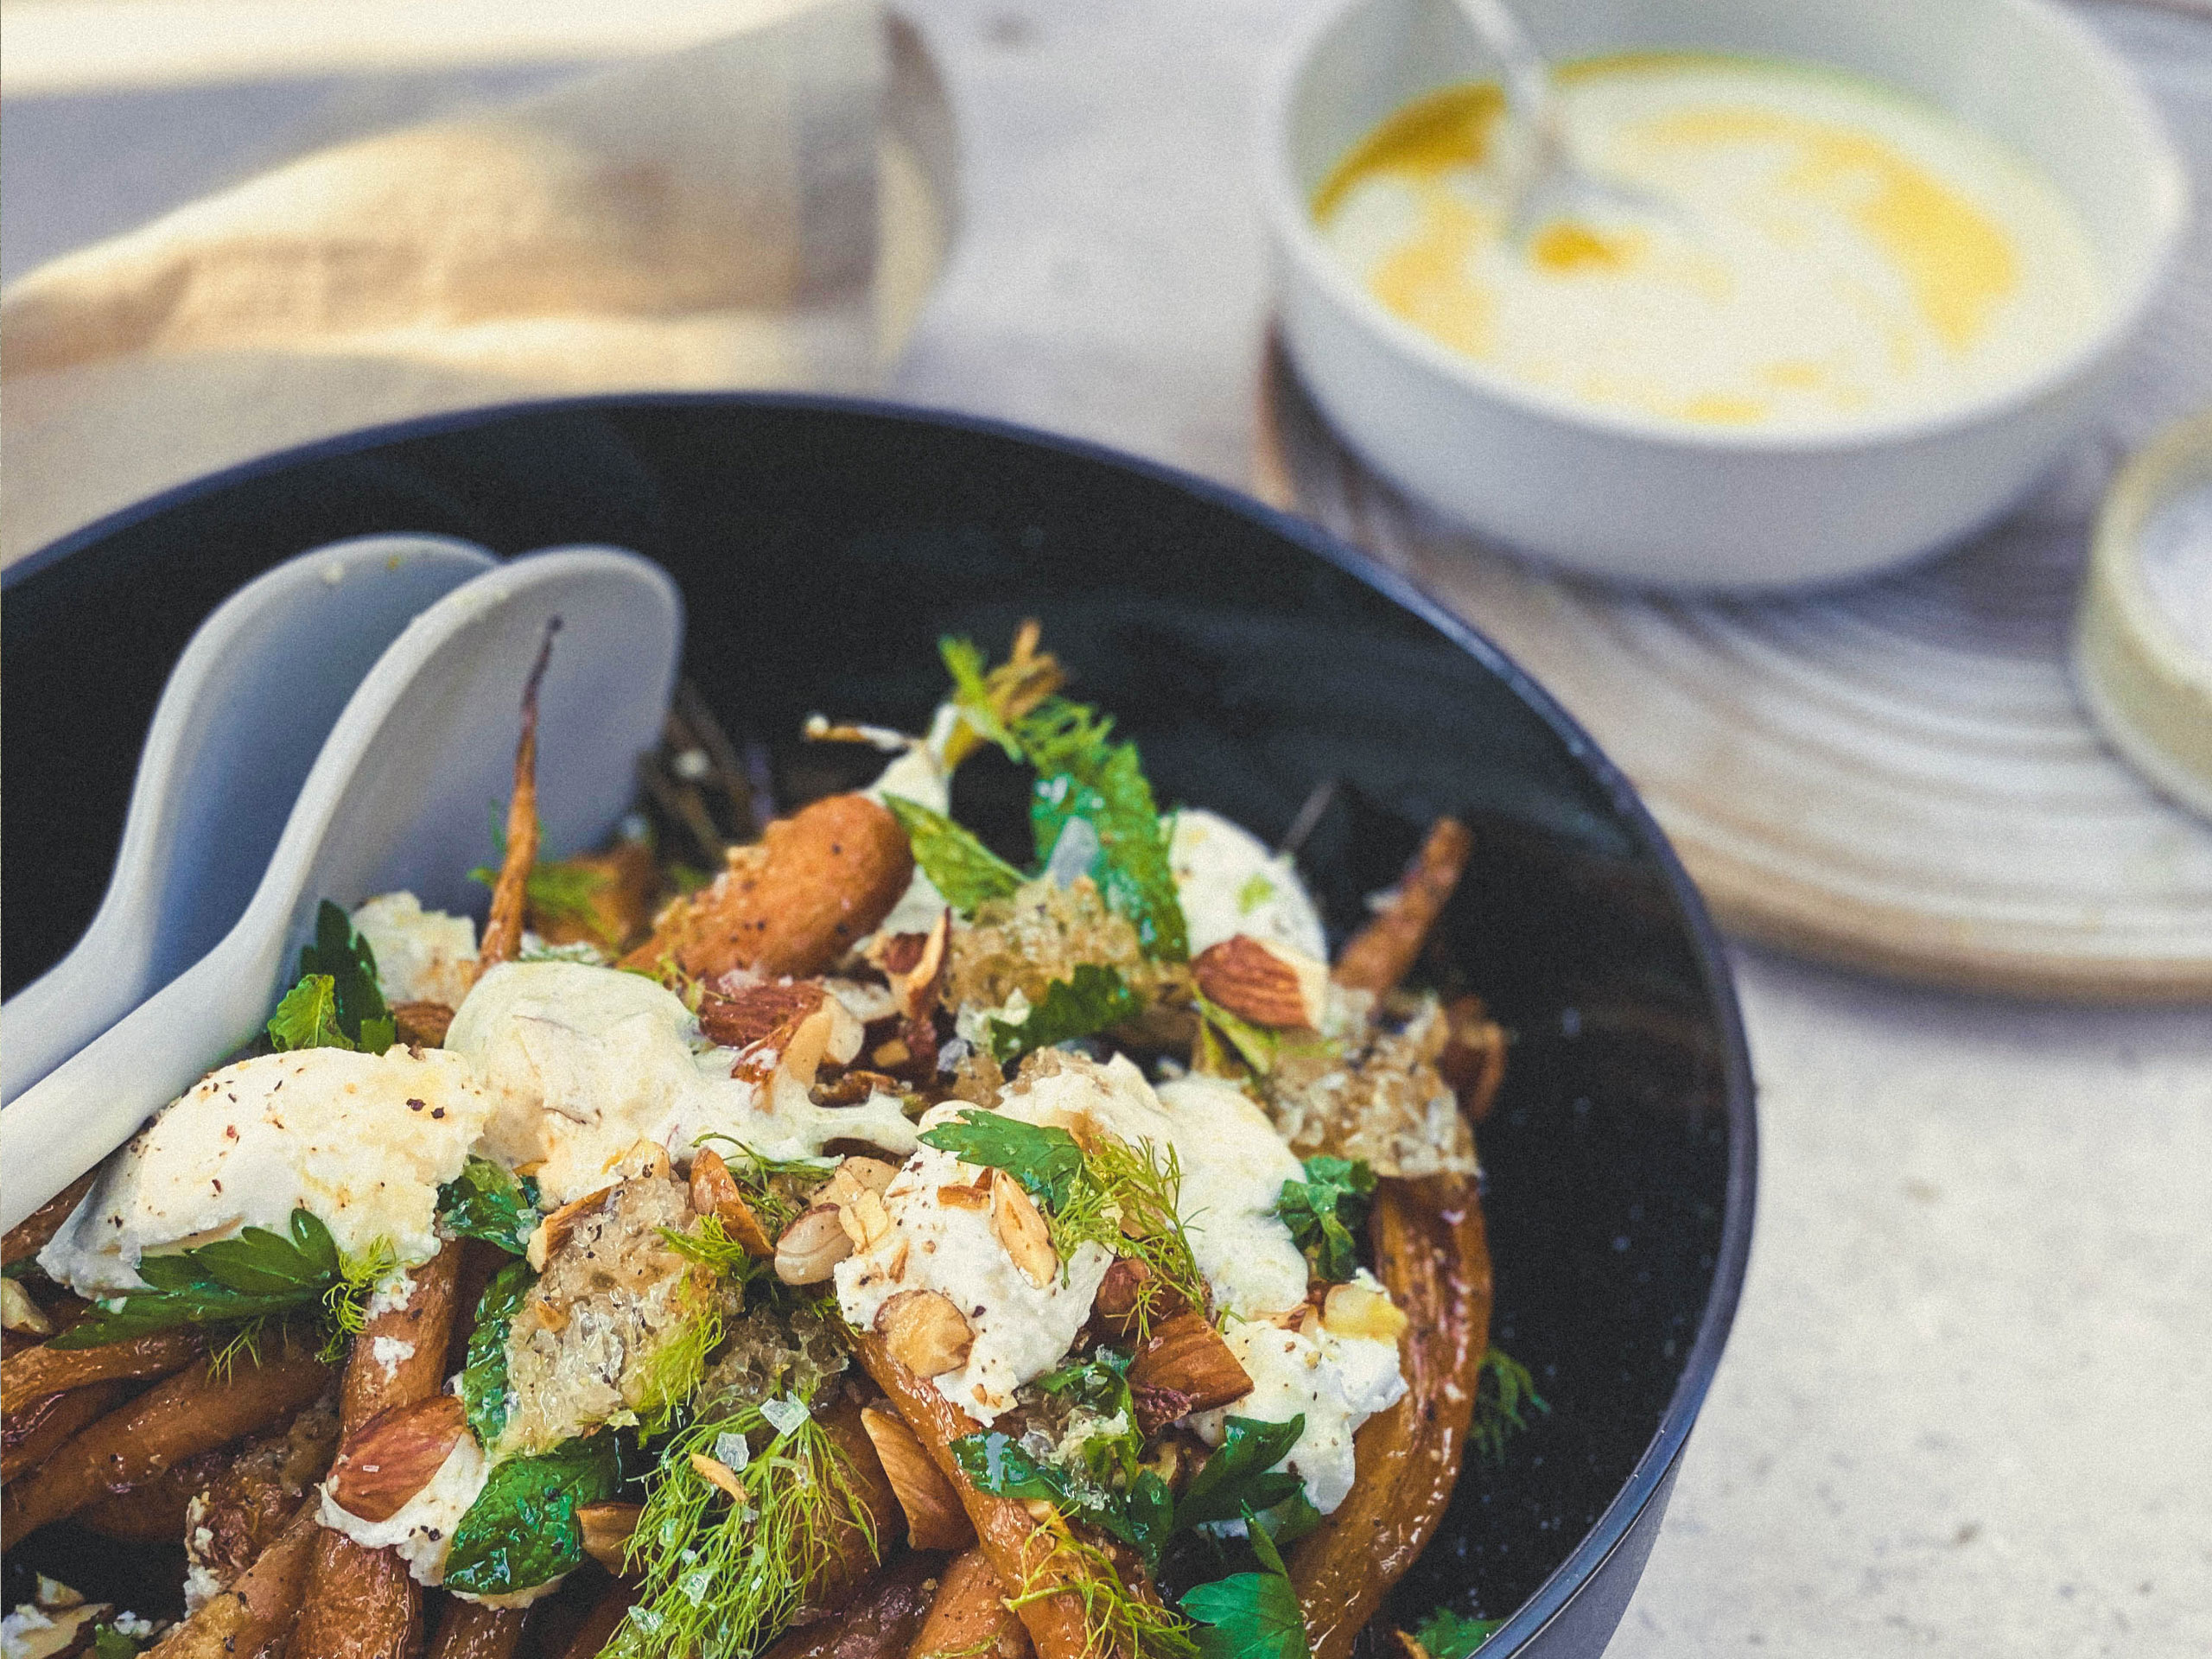 Style Files From Our Kitchen Roasted Honey Carrot Salad. Never underestimate the humble carrot! This punchy salad really surprises with soft and crunchy textures, and sweet and salty balance.